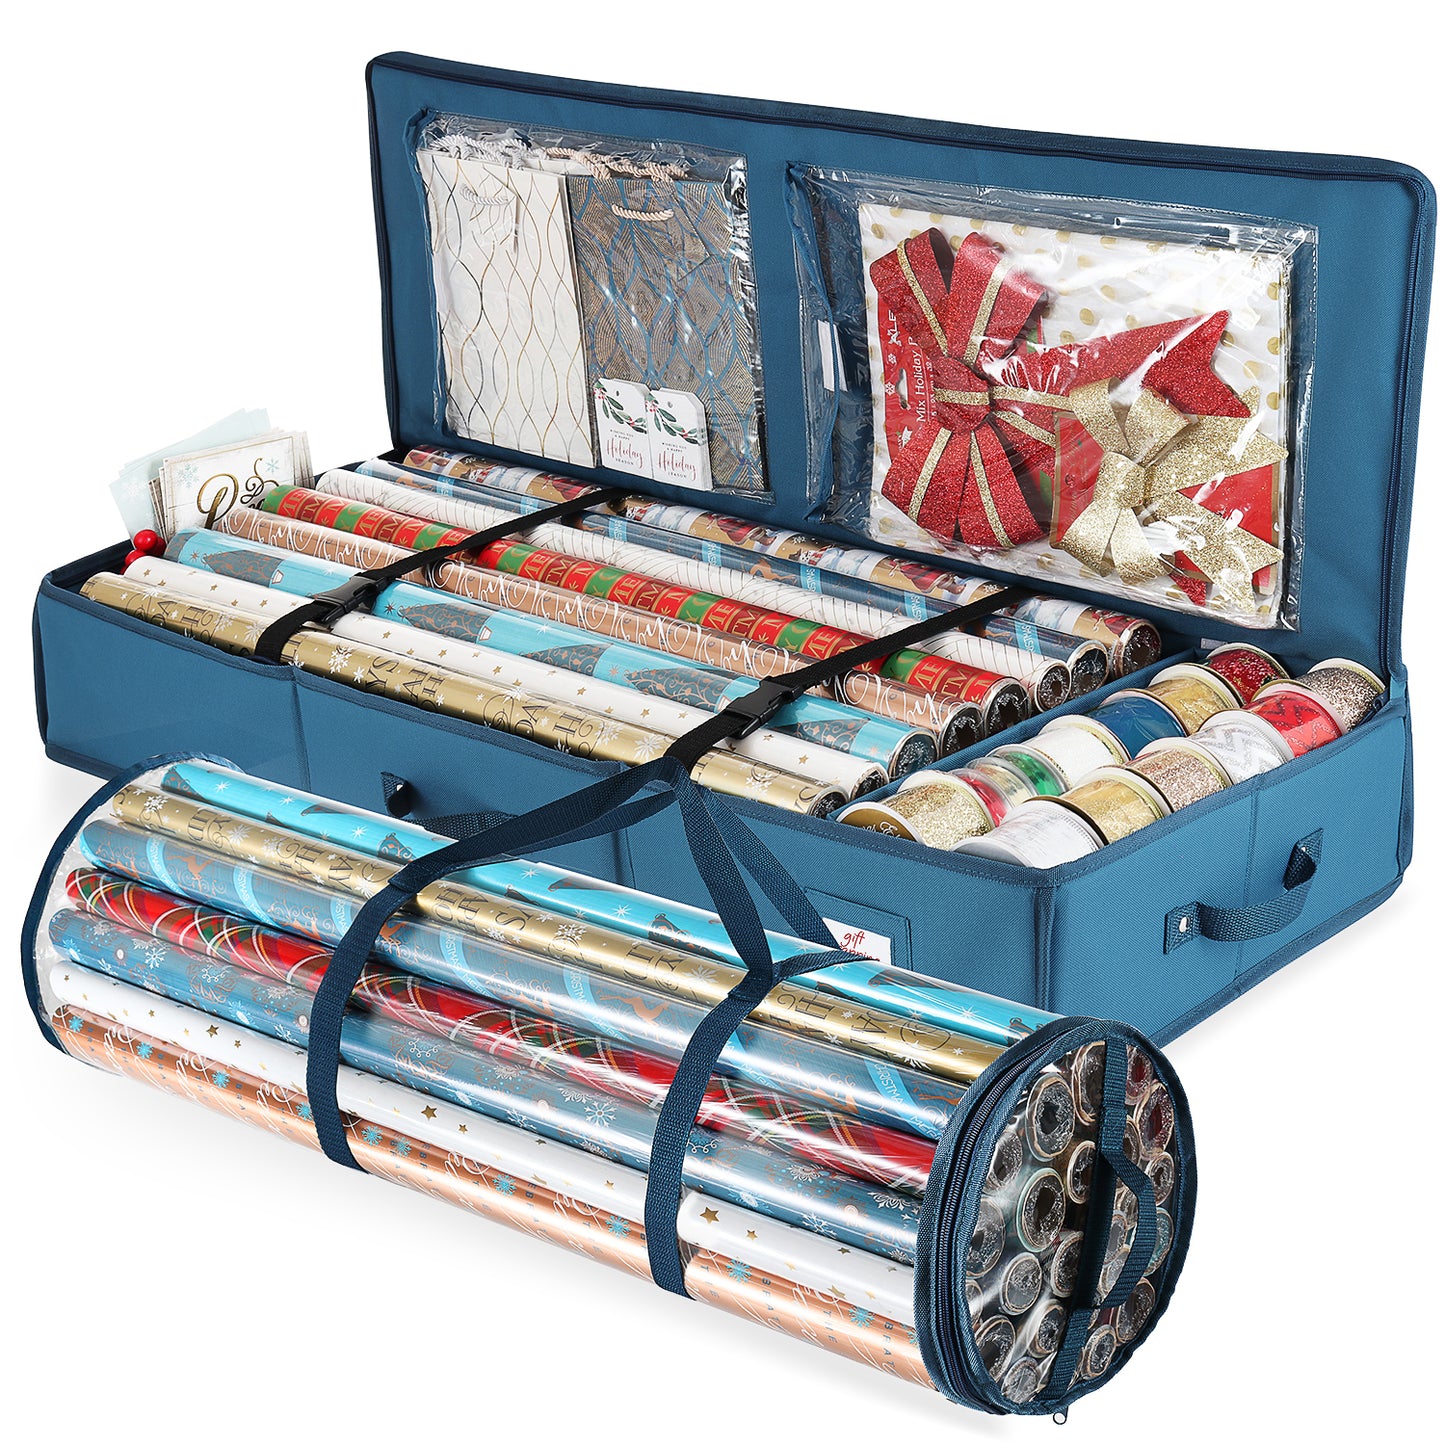 Hearth & Harbor Gift Wrap Storage Organizer Set - Set of 2 Christmas Organizer Storage Containers For Holiday Wrapping Paper And Accessories